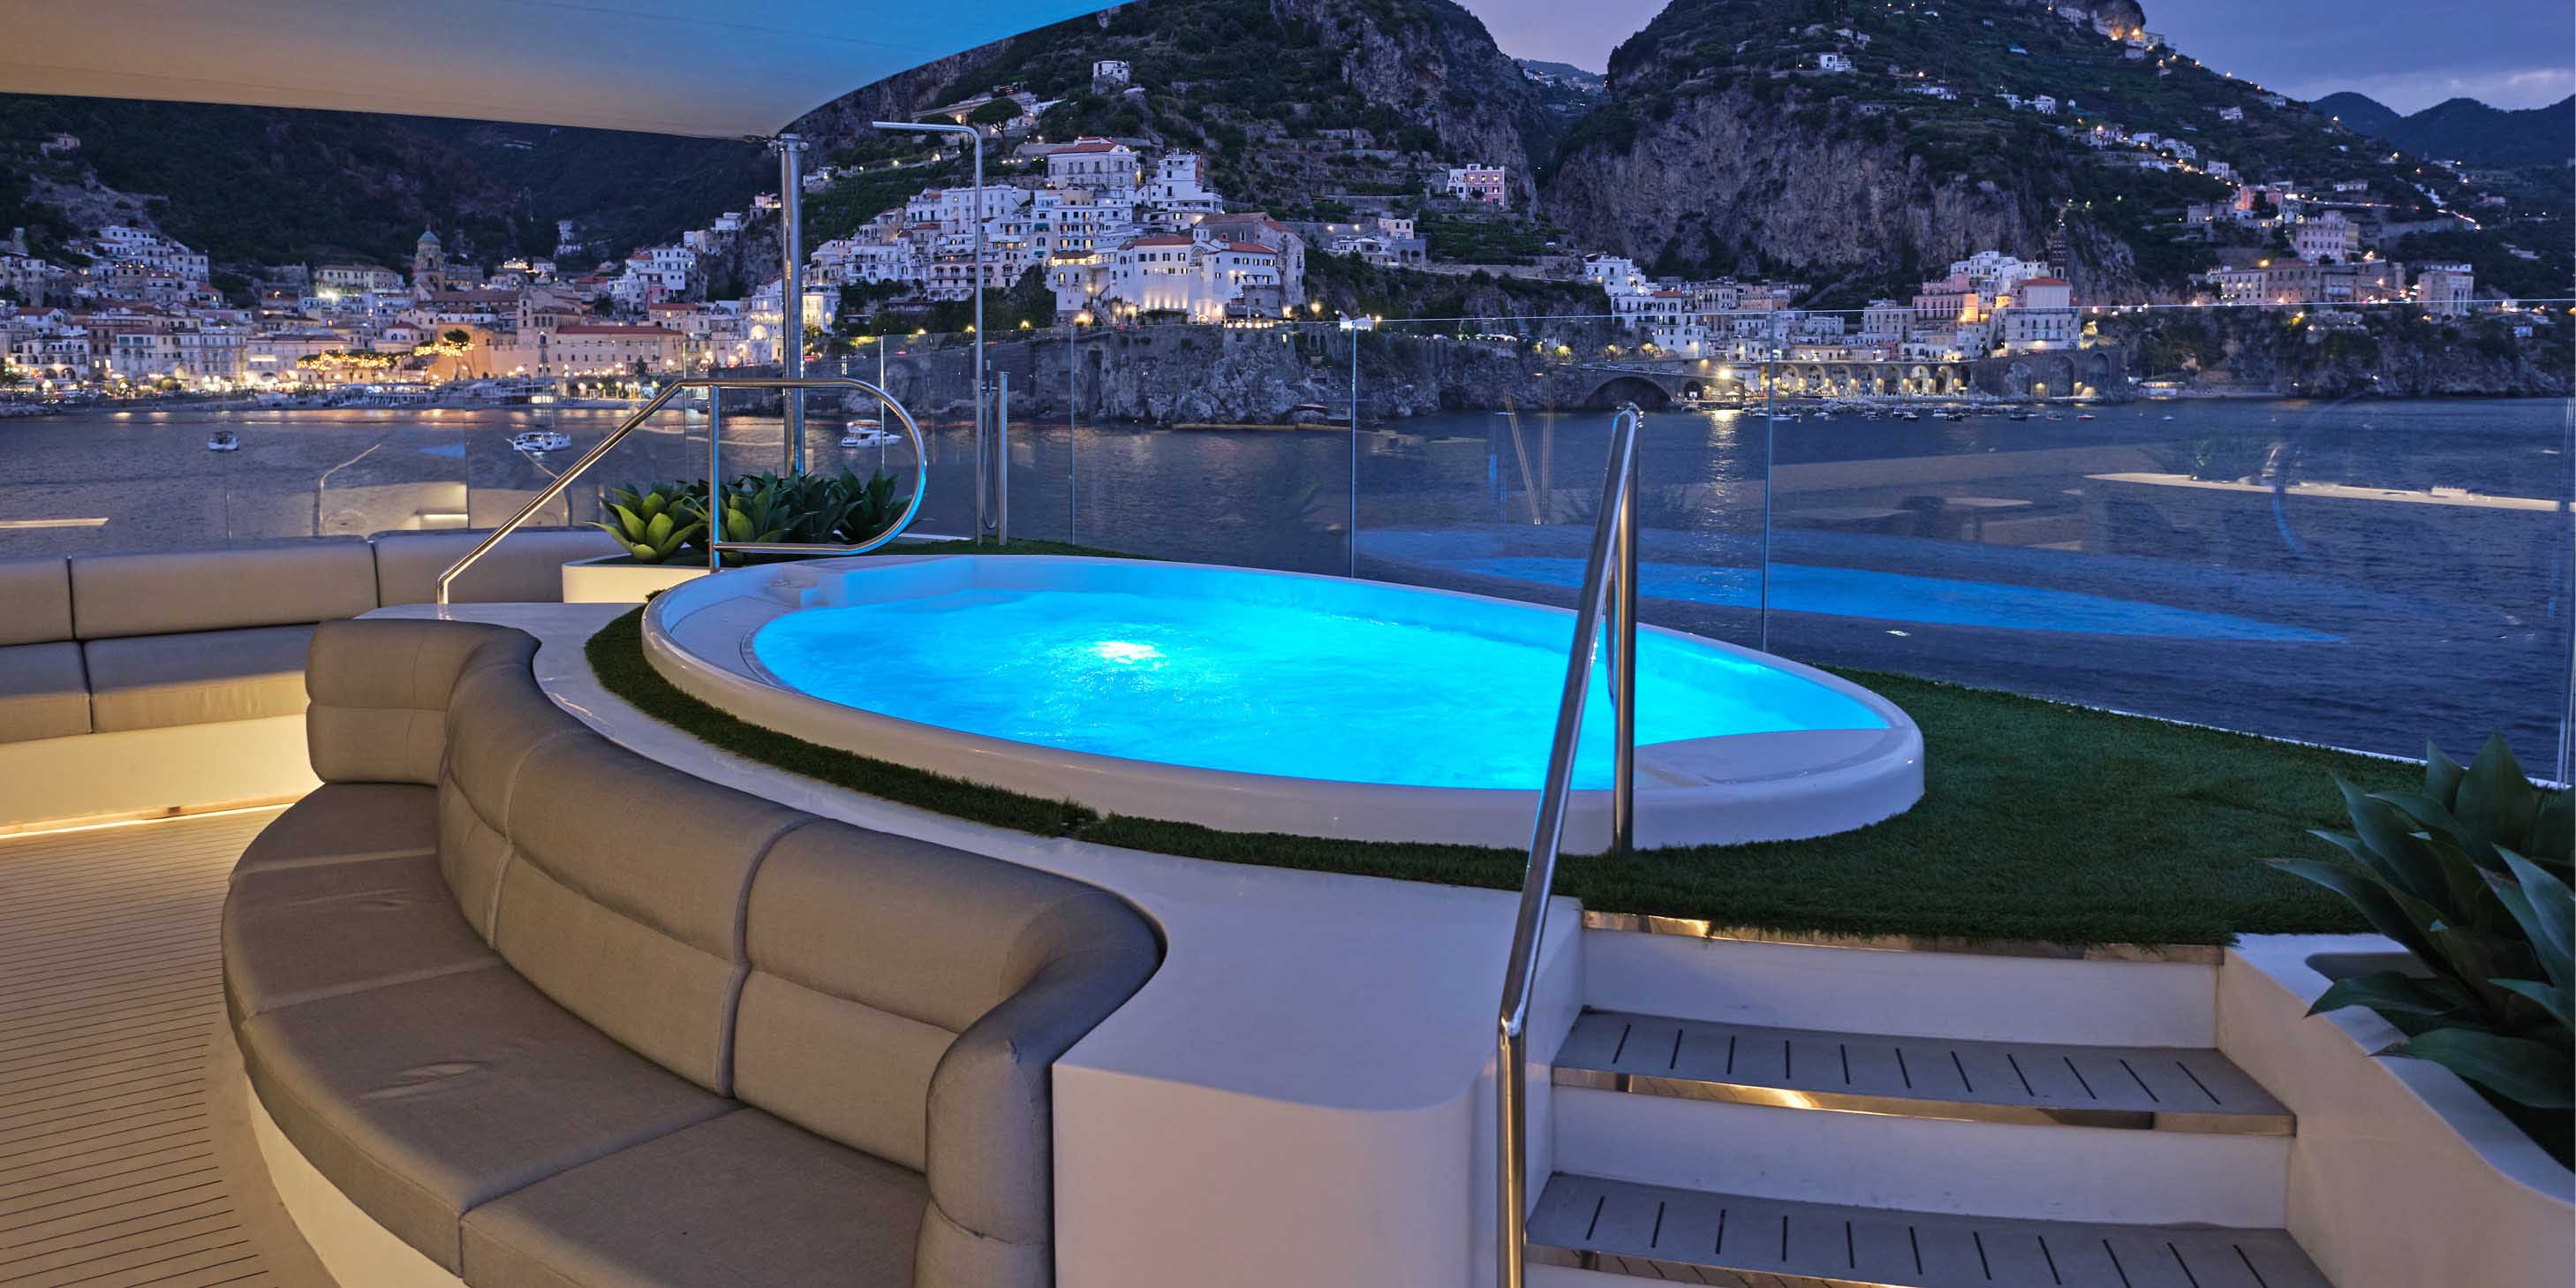 A large hot tub with panoramic views across the stunning landscape of the Mediterranean, next to a top deck bar